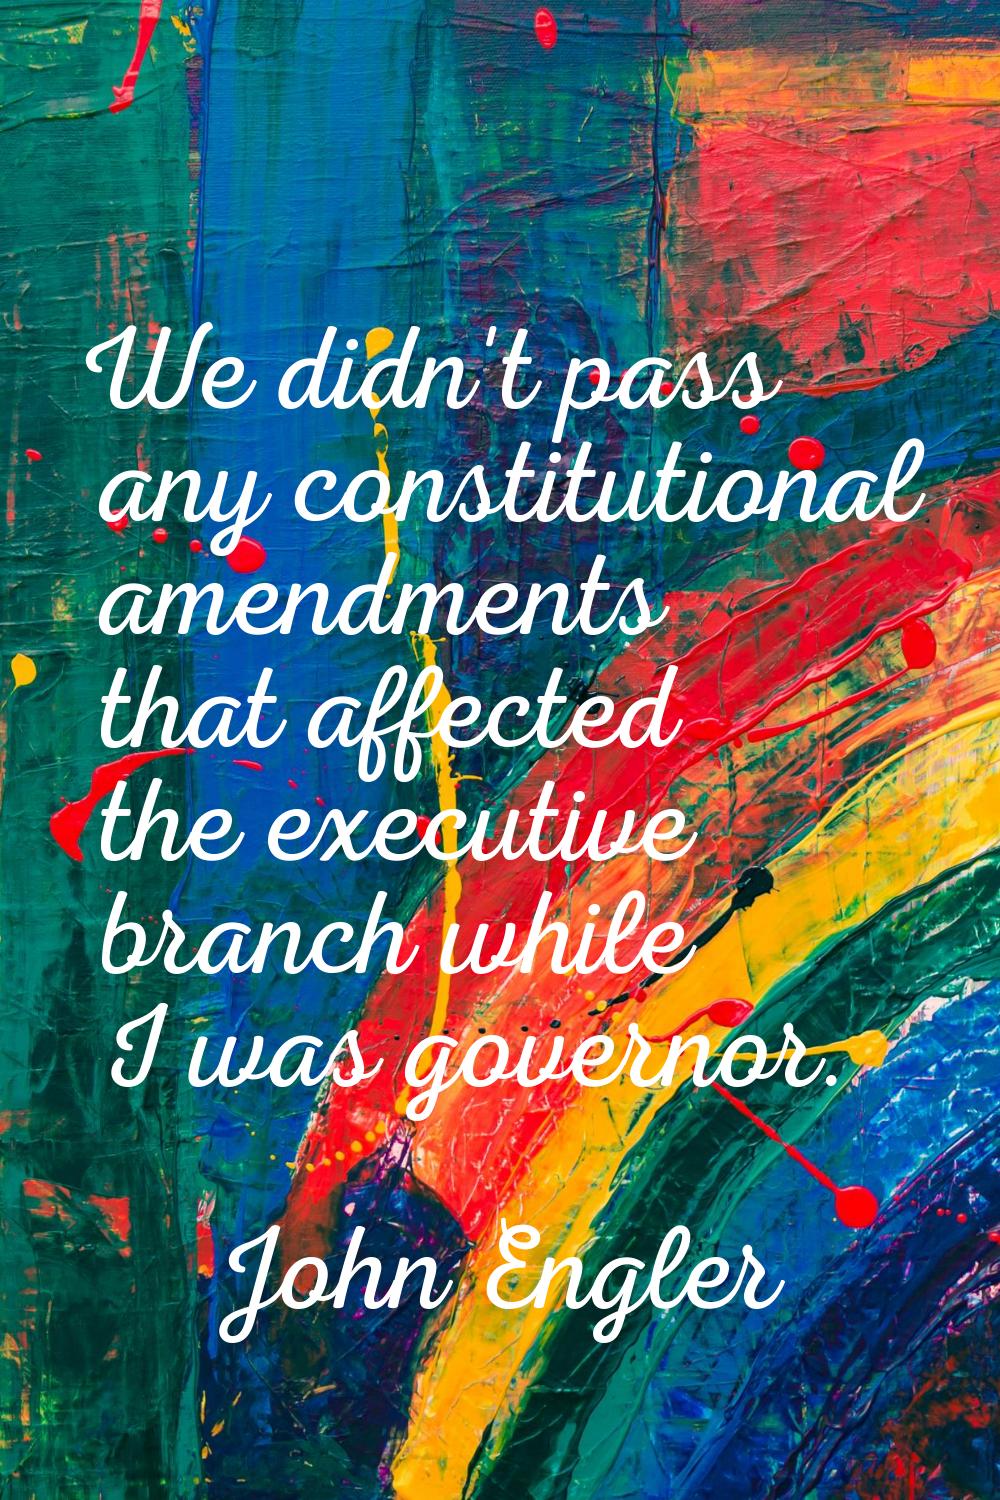 We didn't pass any constitutional amendments that affected the executive branch while I was governo